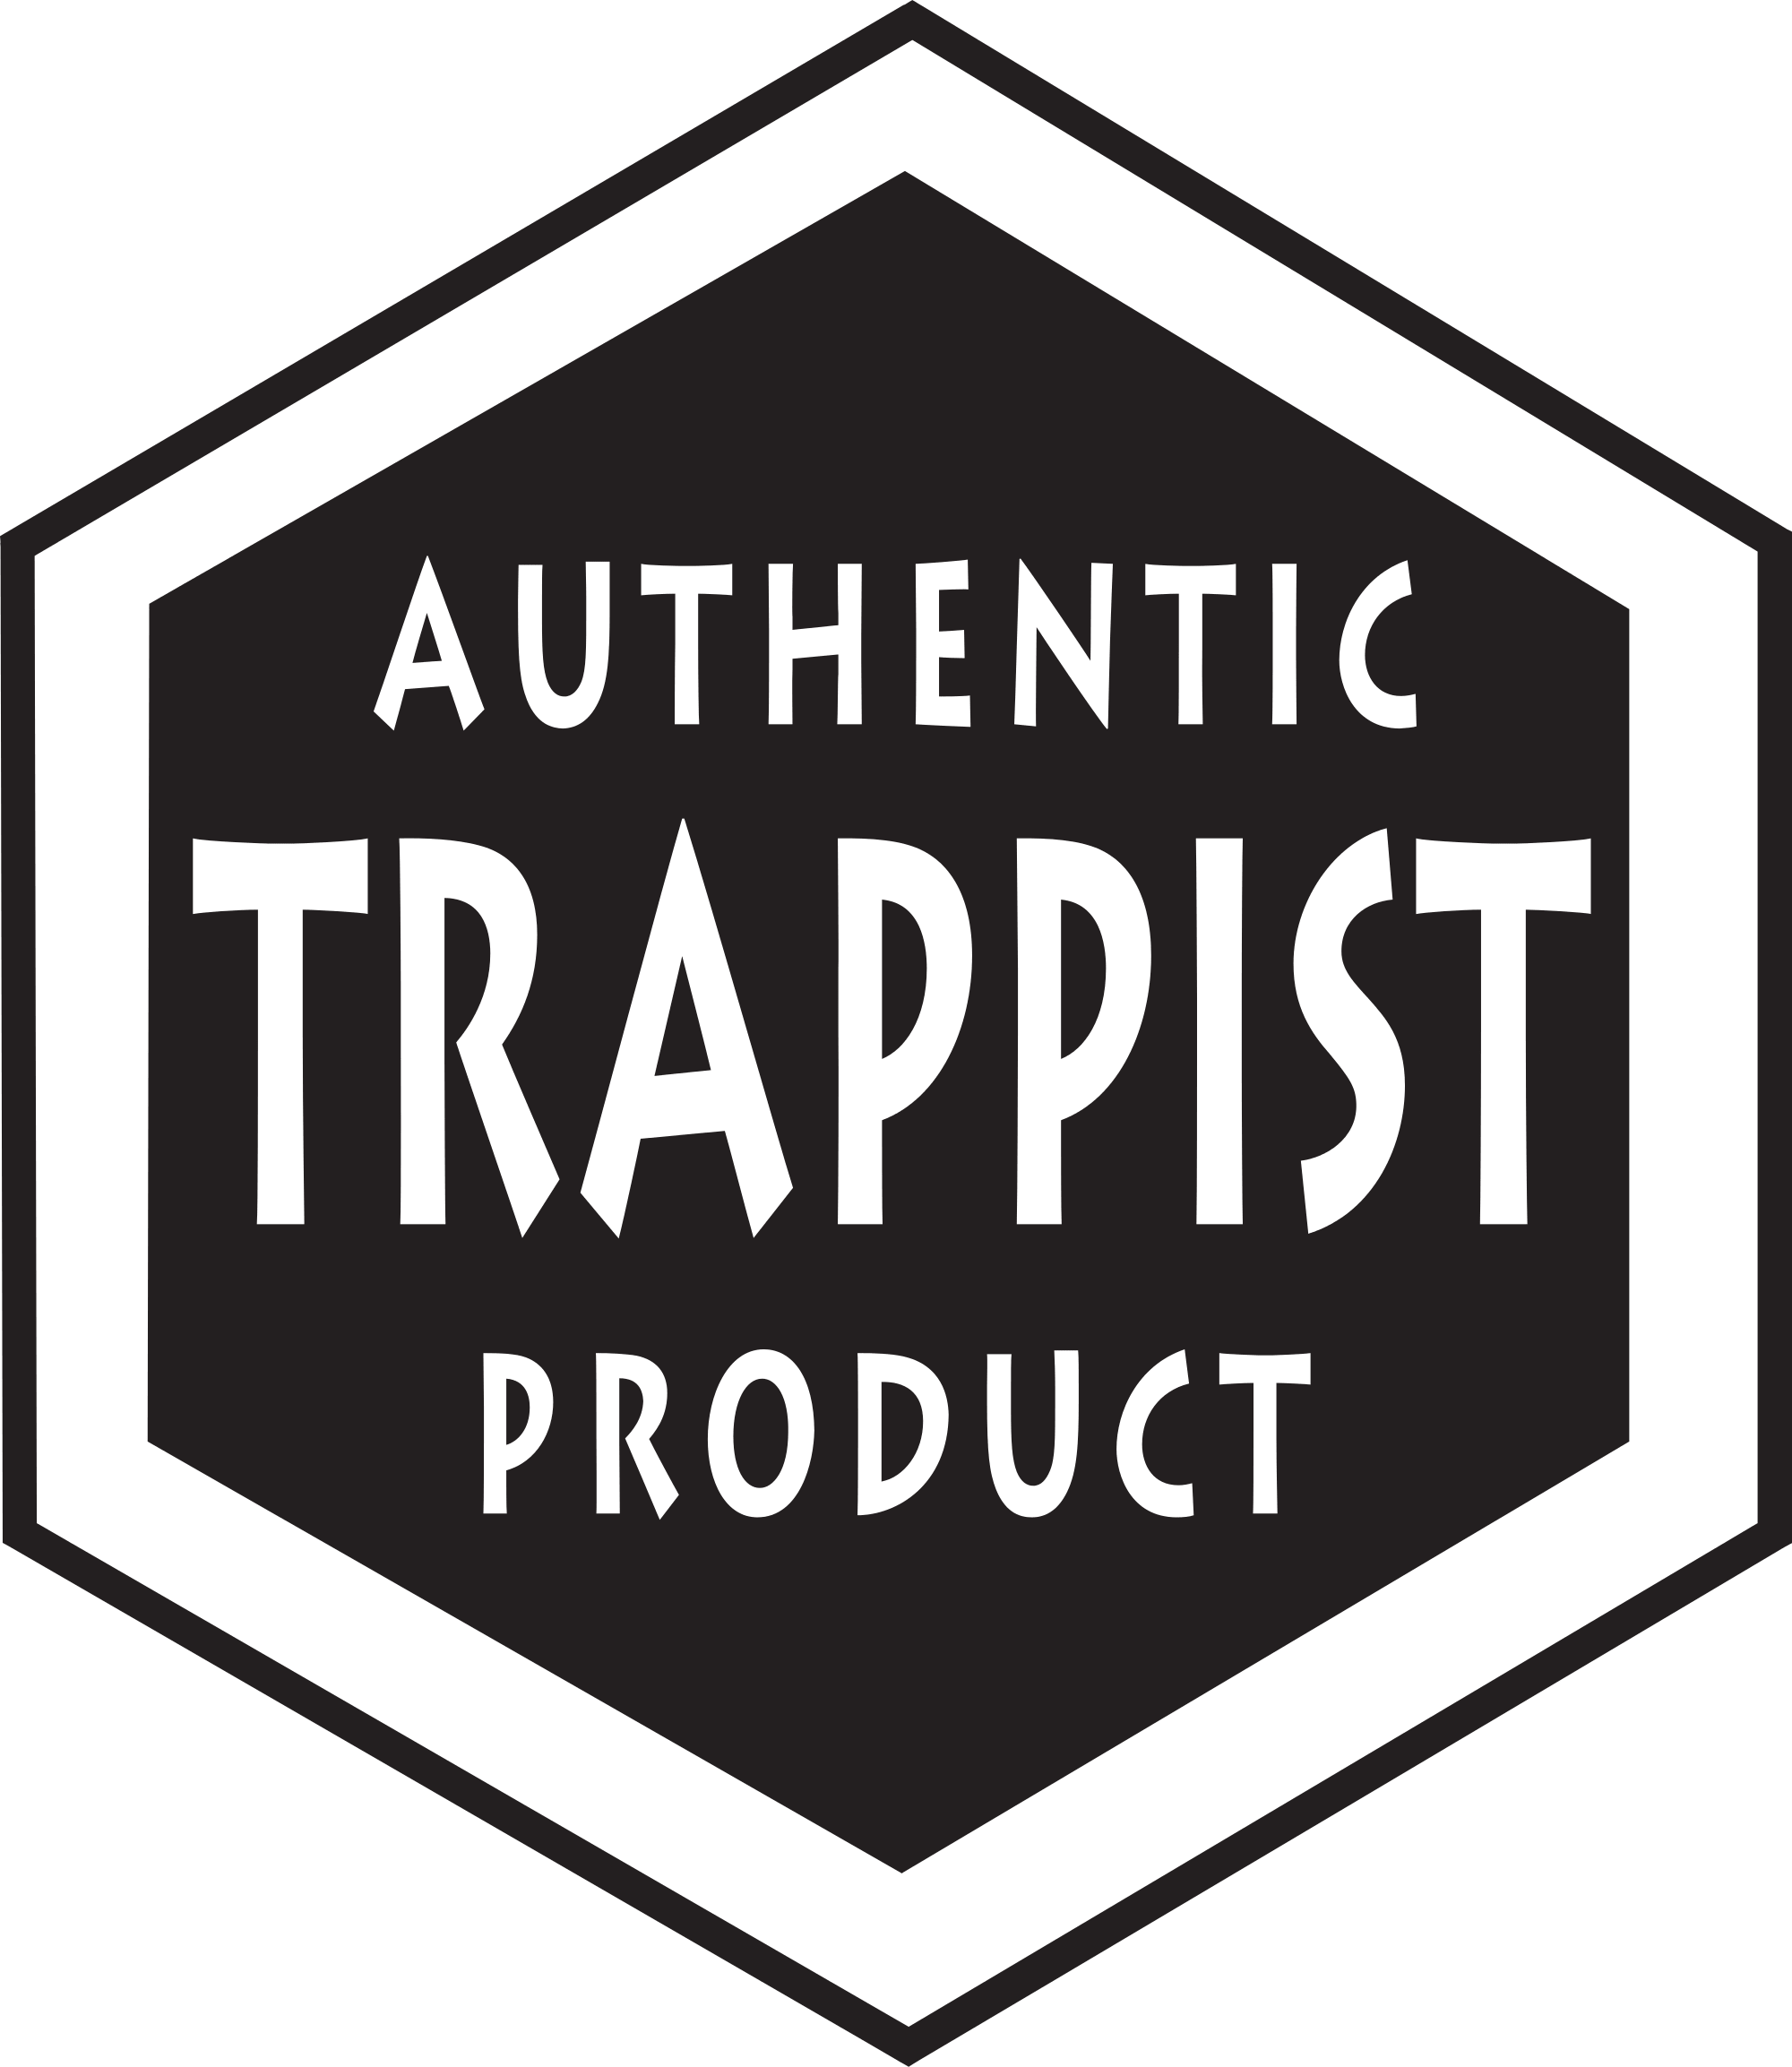 Authentic Trappist Product